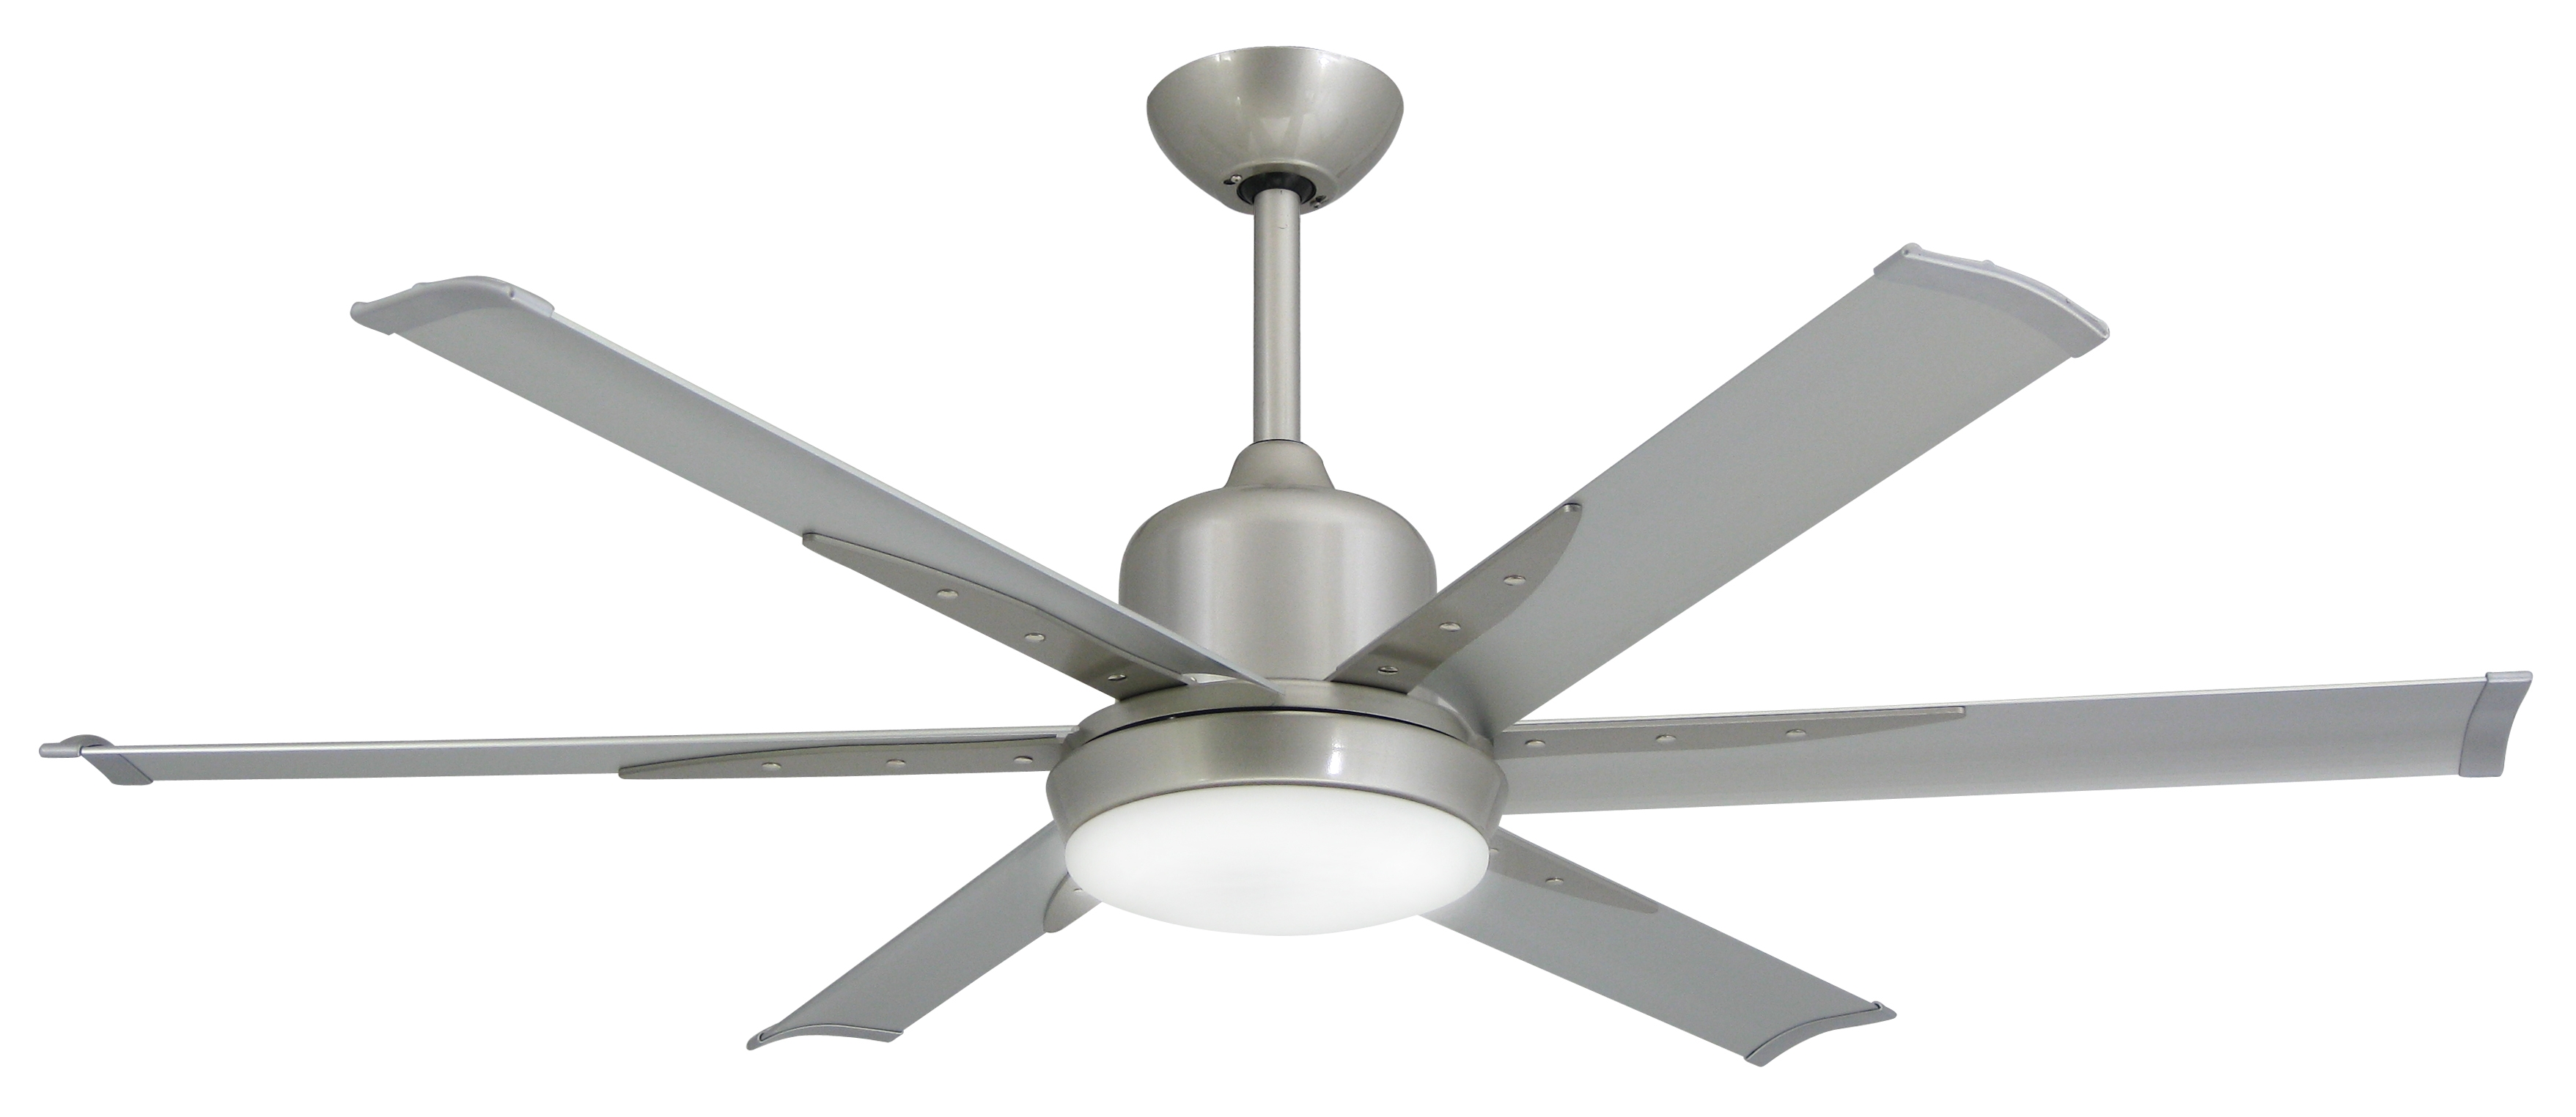 Permalink to White Industrial Ceiling Fan With Light